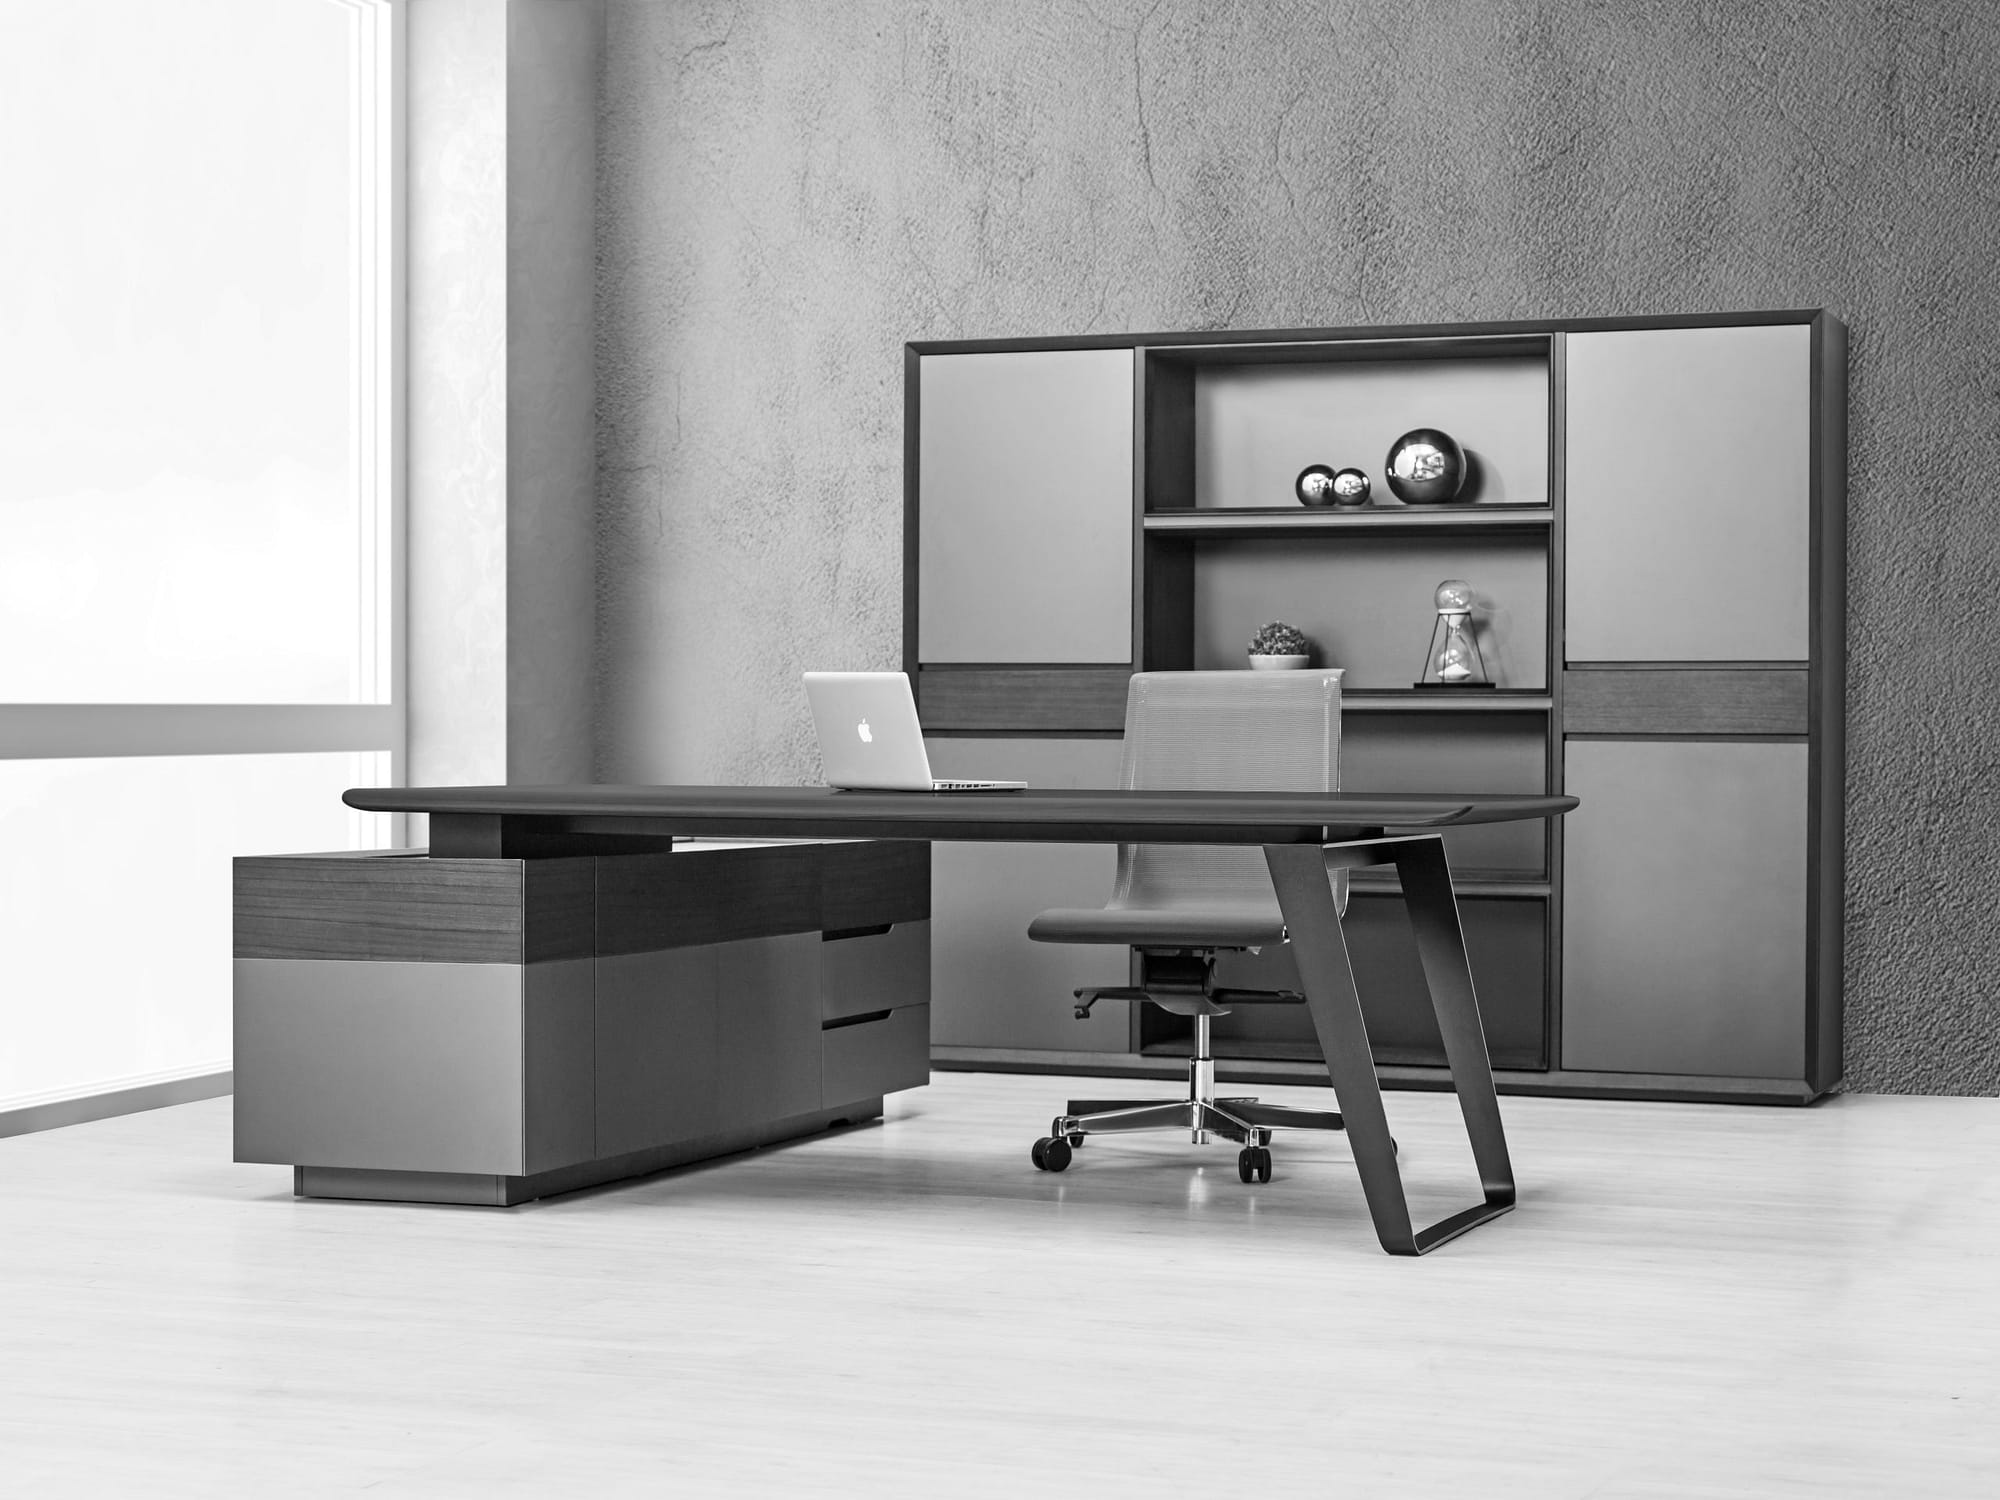 Versa Concept – Education, Student Housing, Hospitality and Office Furniture